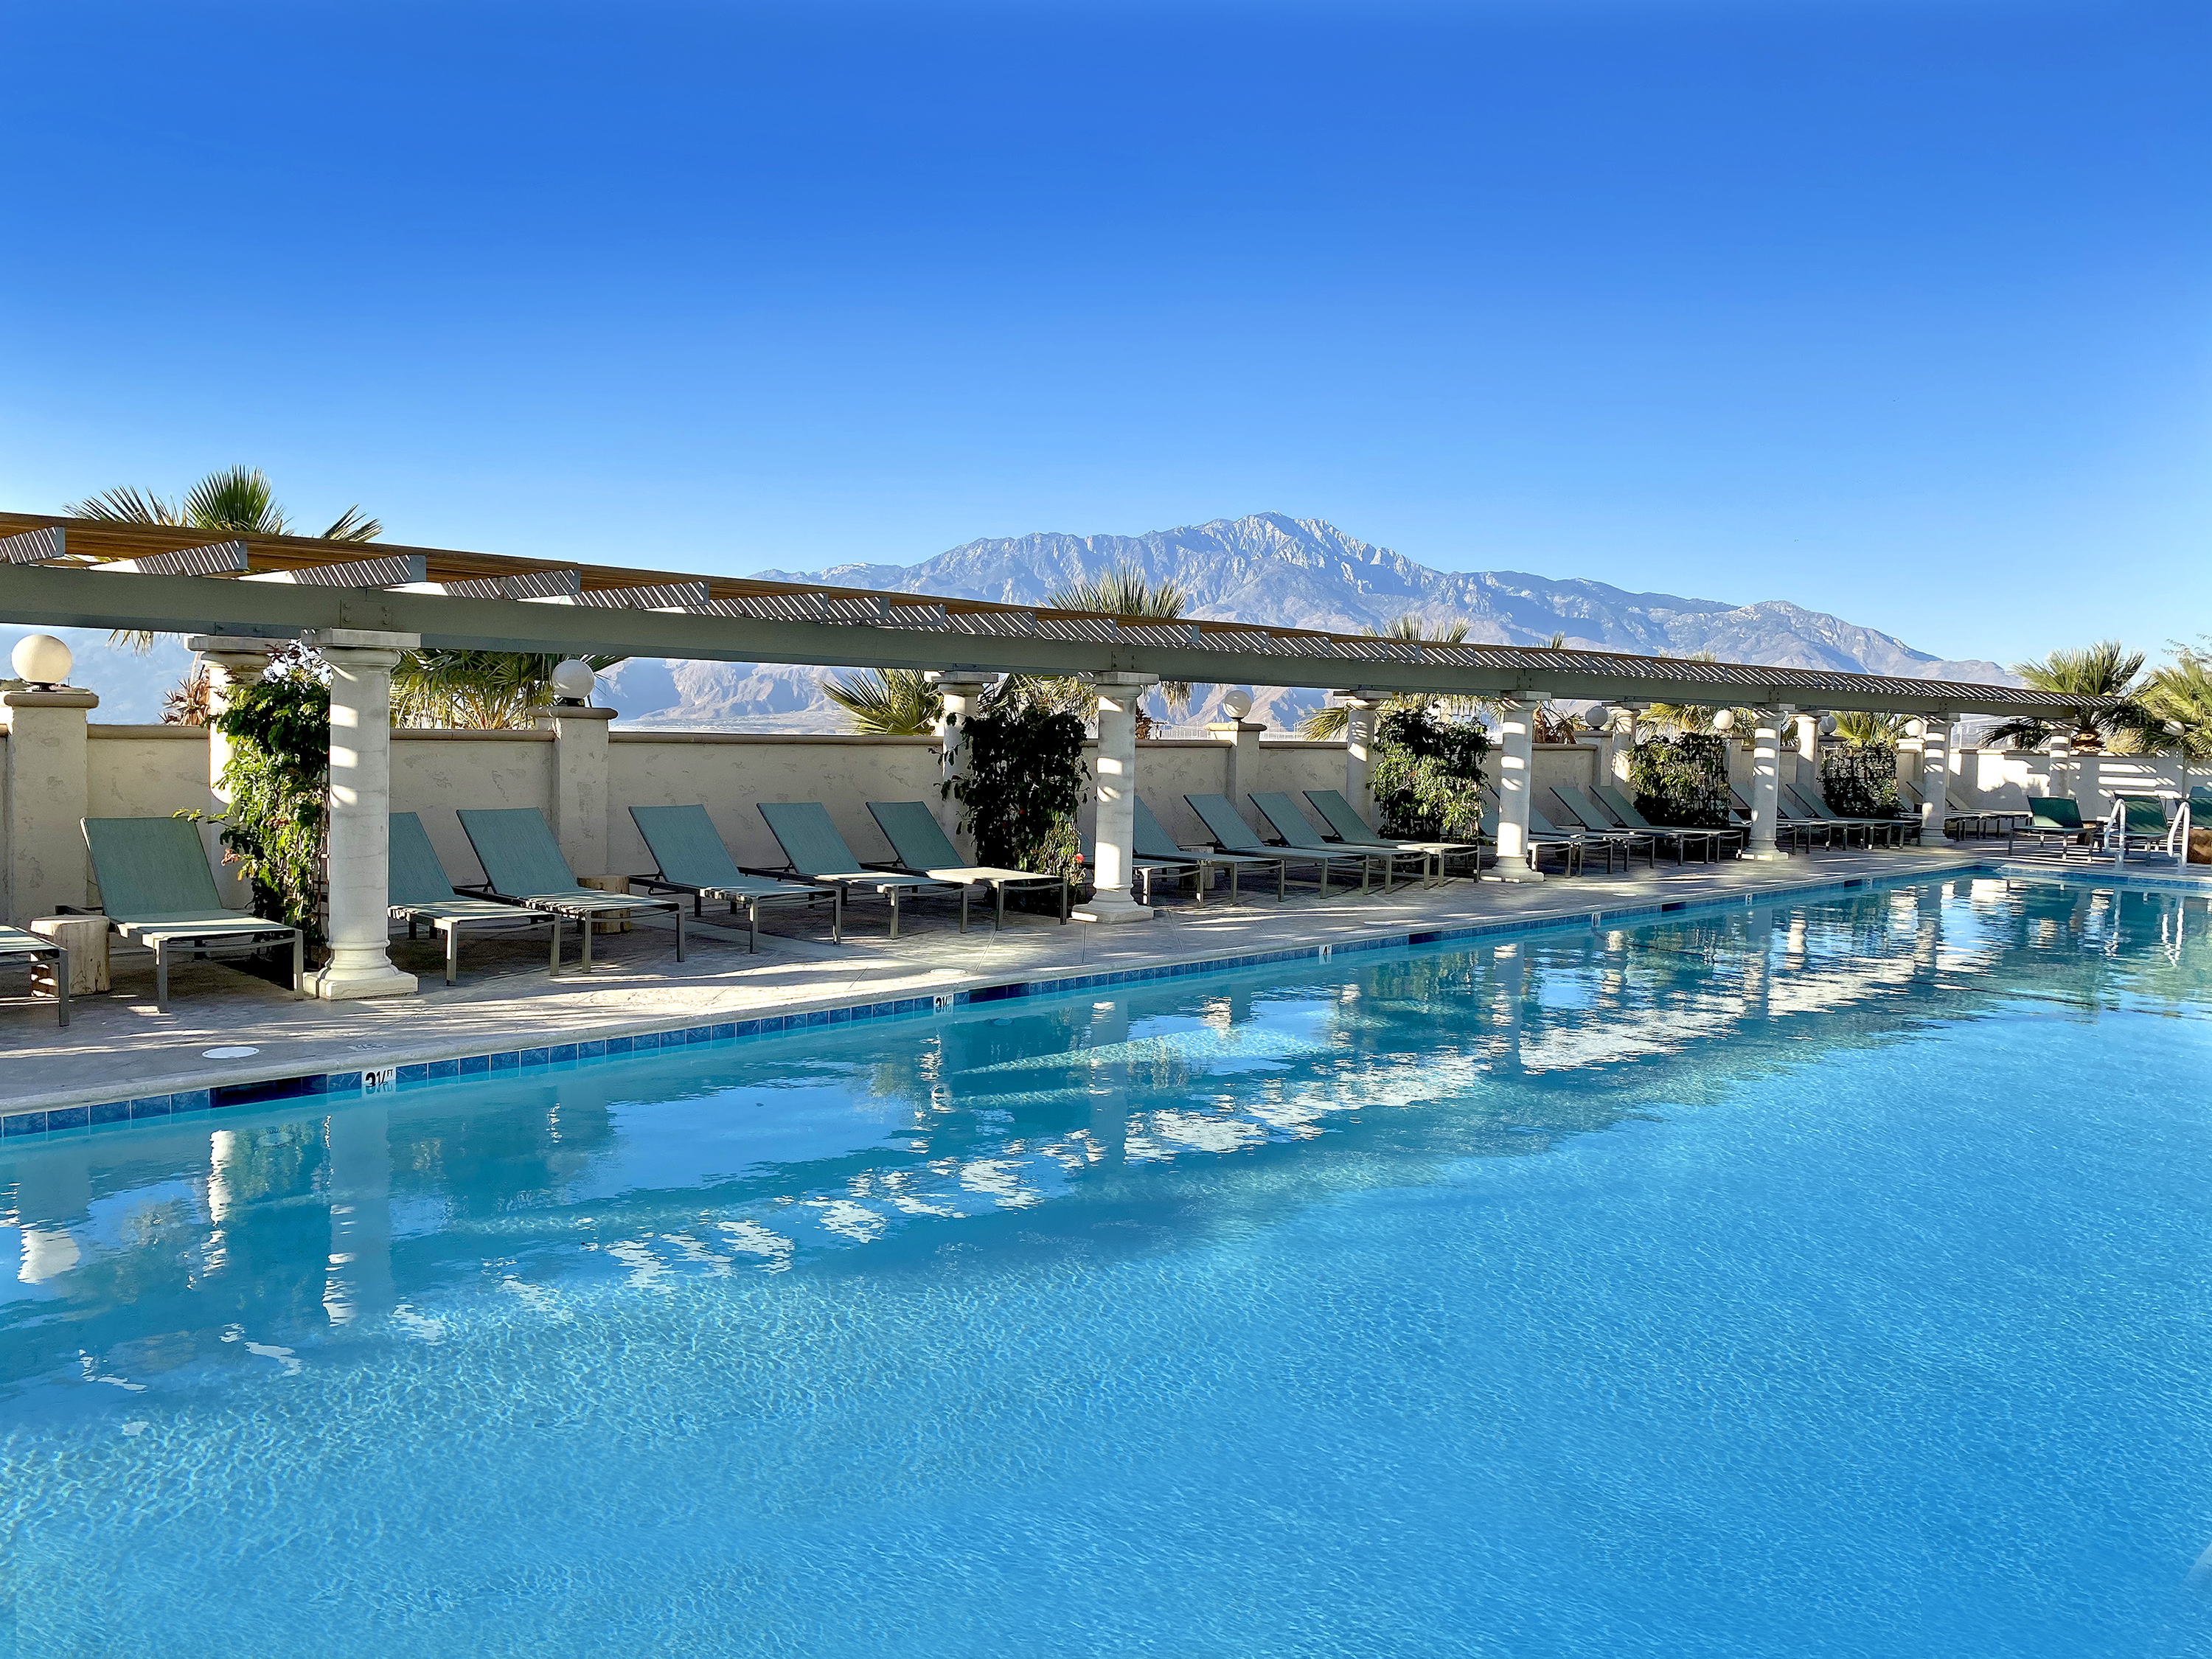 Review The Azure Palm Springs Has In-Room Hot Springs Tubs pic